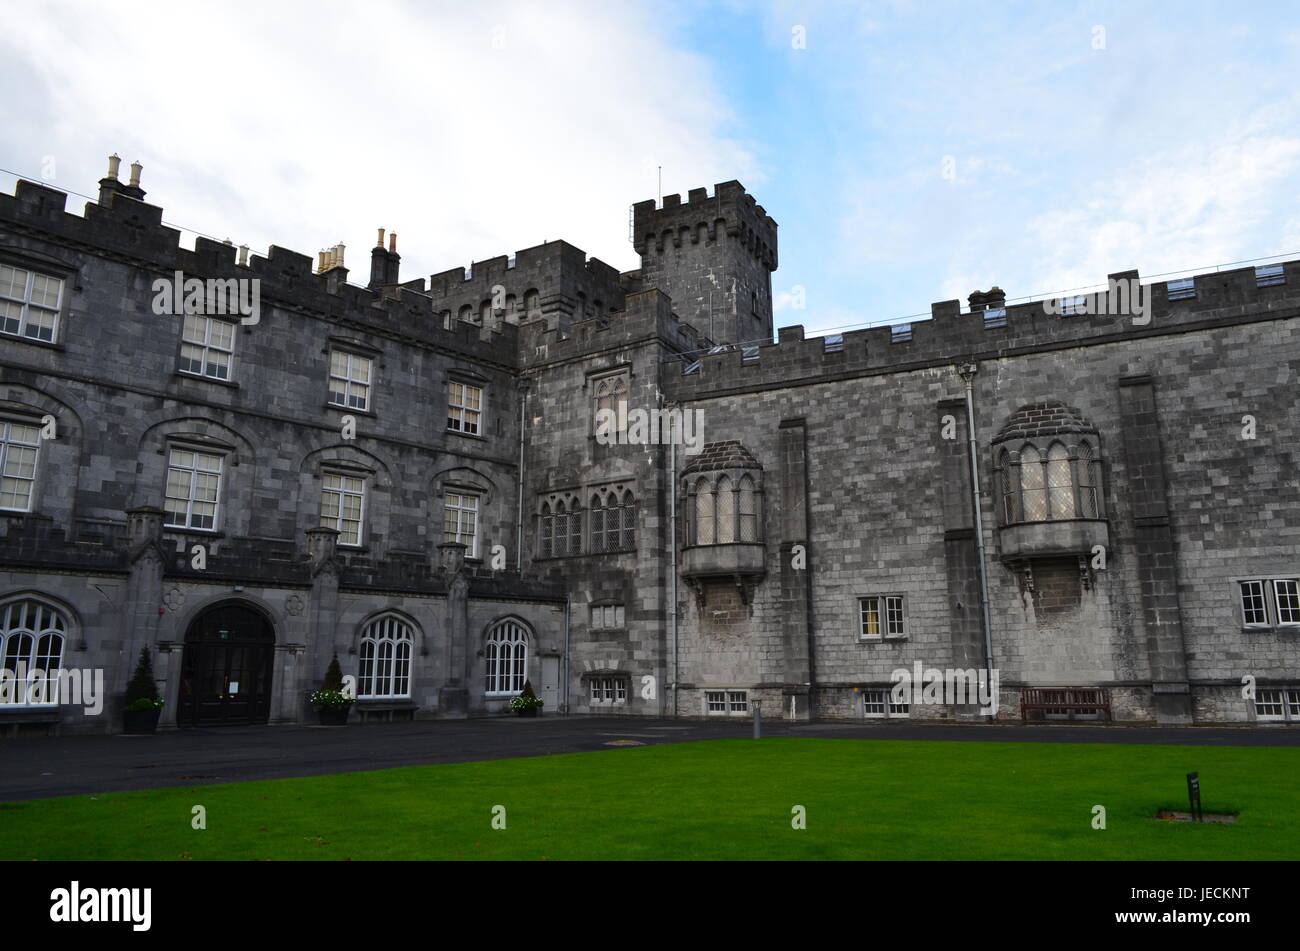 Details of Kilkenny Castle and Its Garden, Ireland Stock Photo